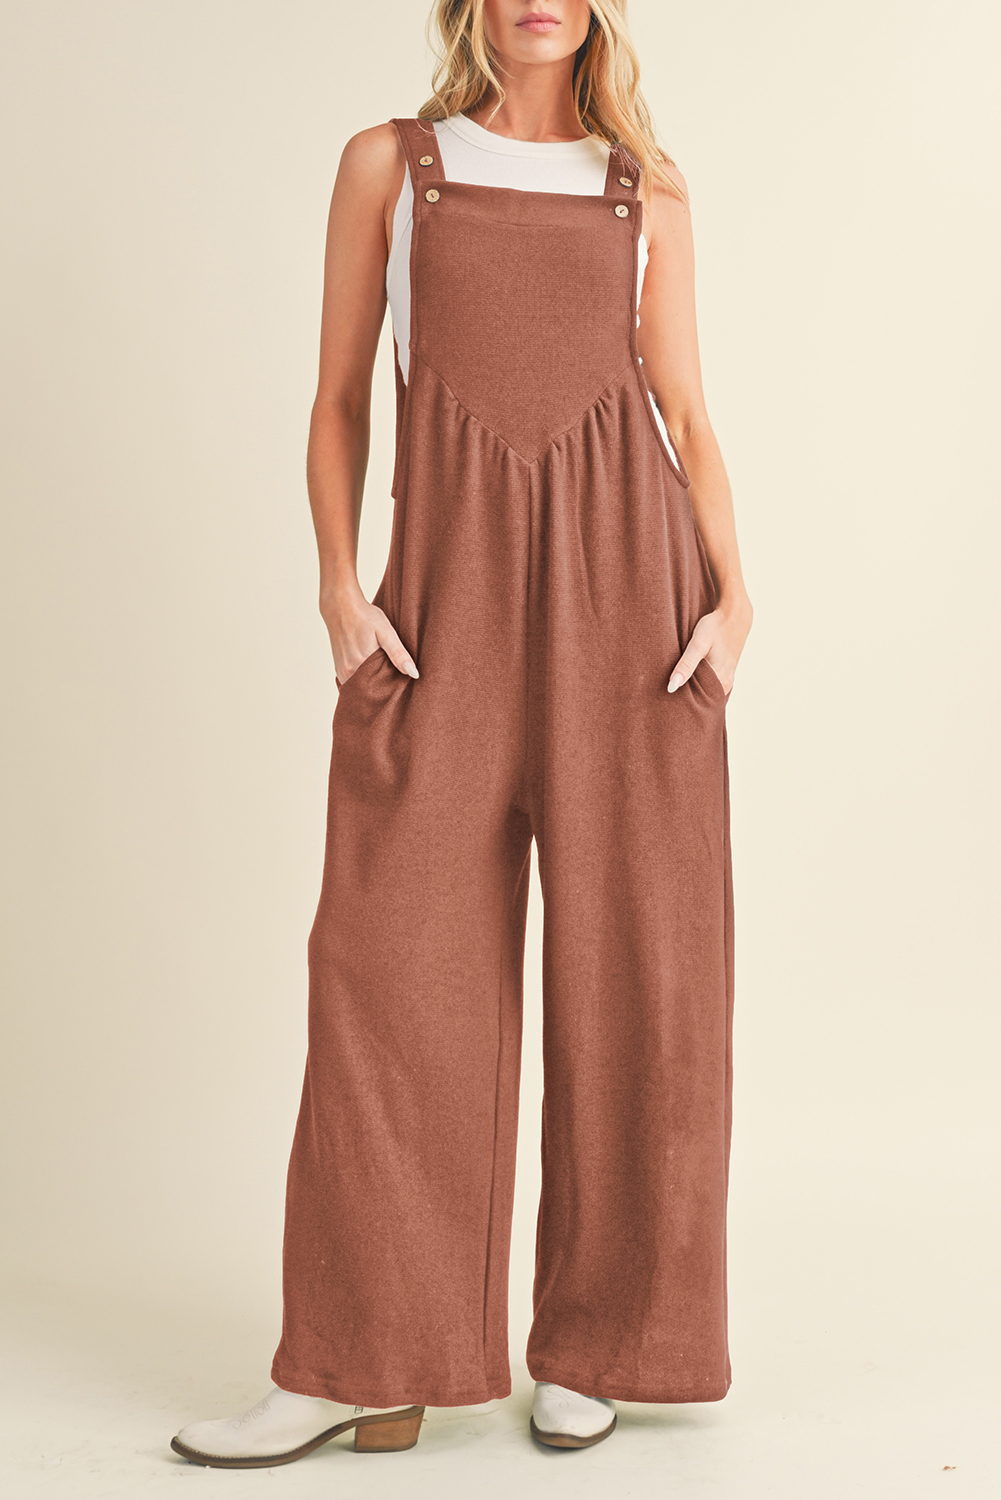 GOLD Flame Buttoned Straps Ruched Wide Leg Jumpsuit